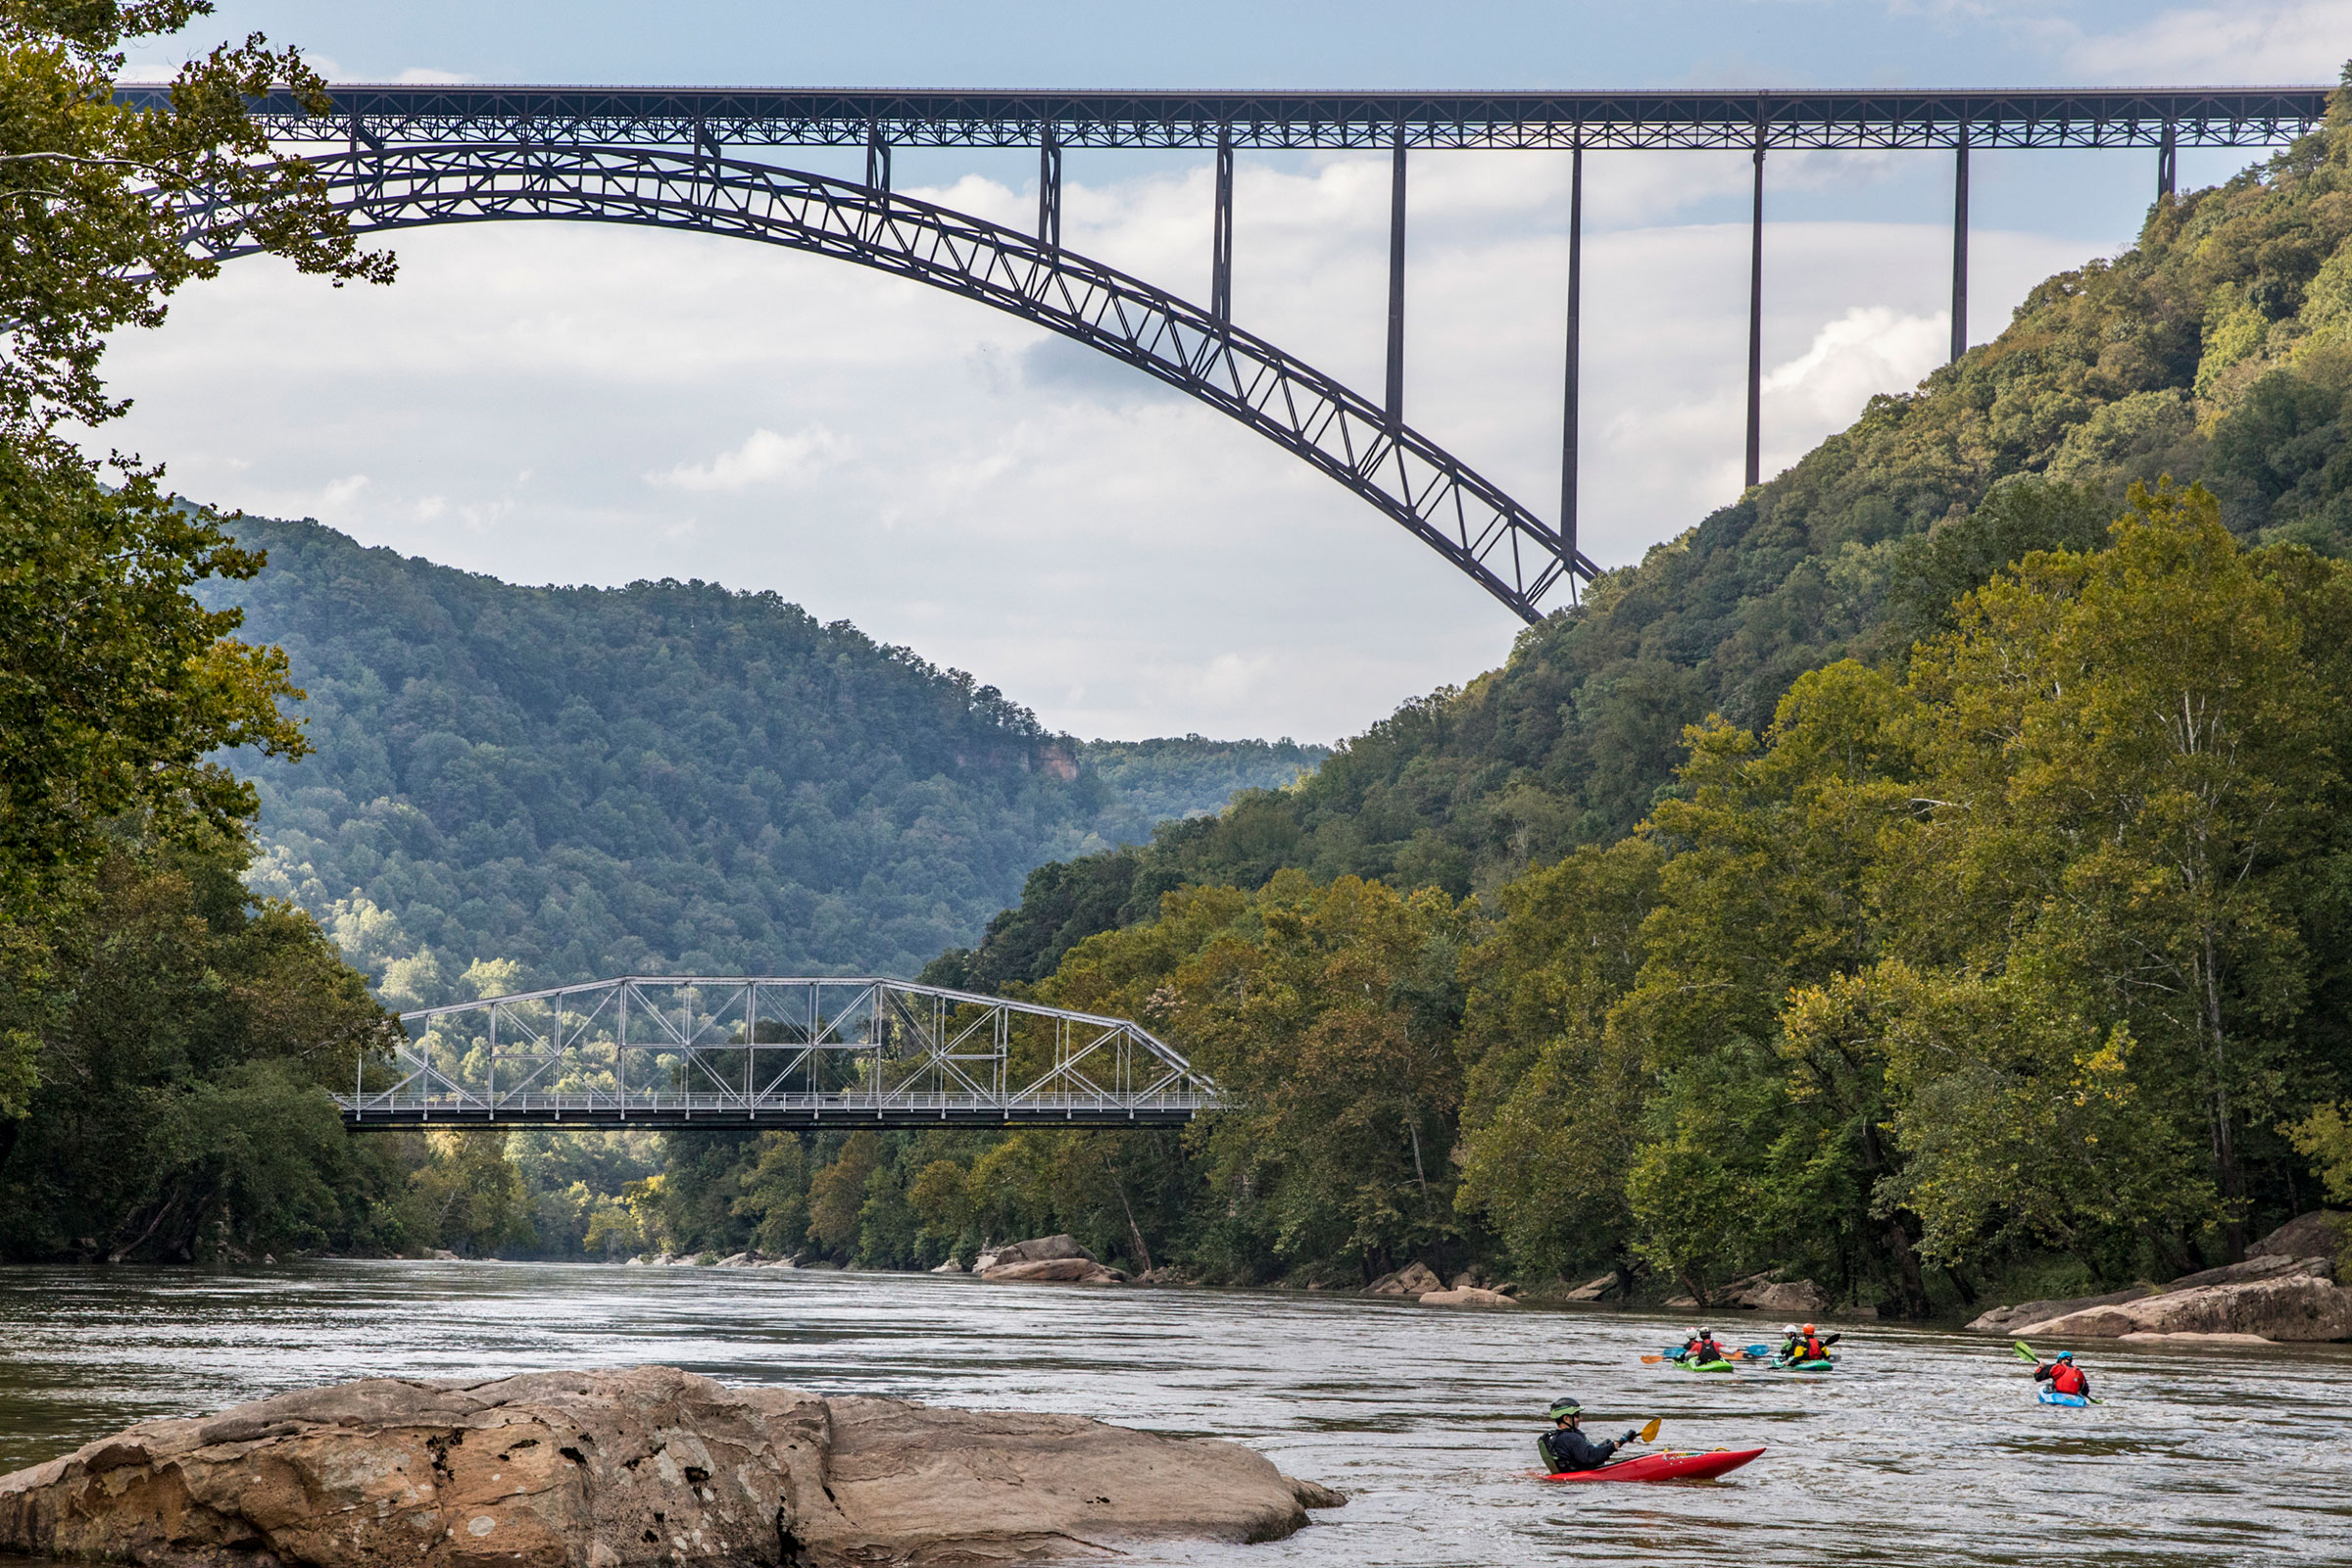 Kayakers under the New River Gorge Bridge in Fayetteville, West Virginia. (Tony Cenicola—The New York Times/Redux)